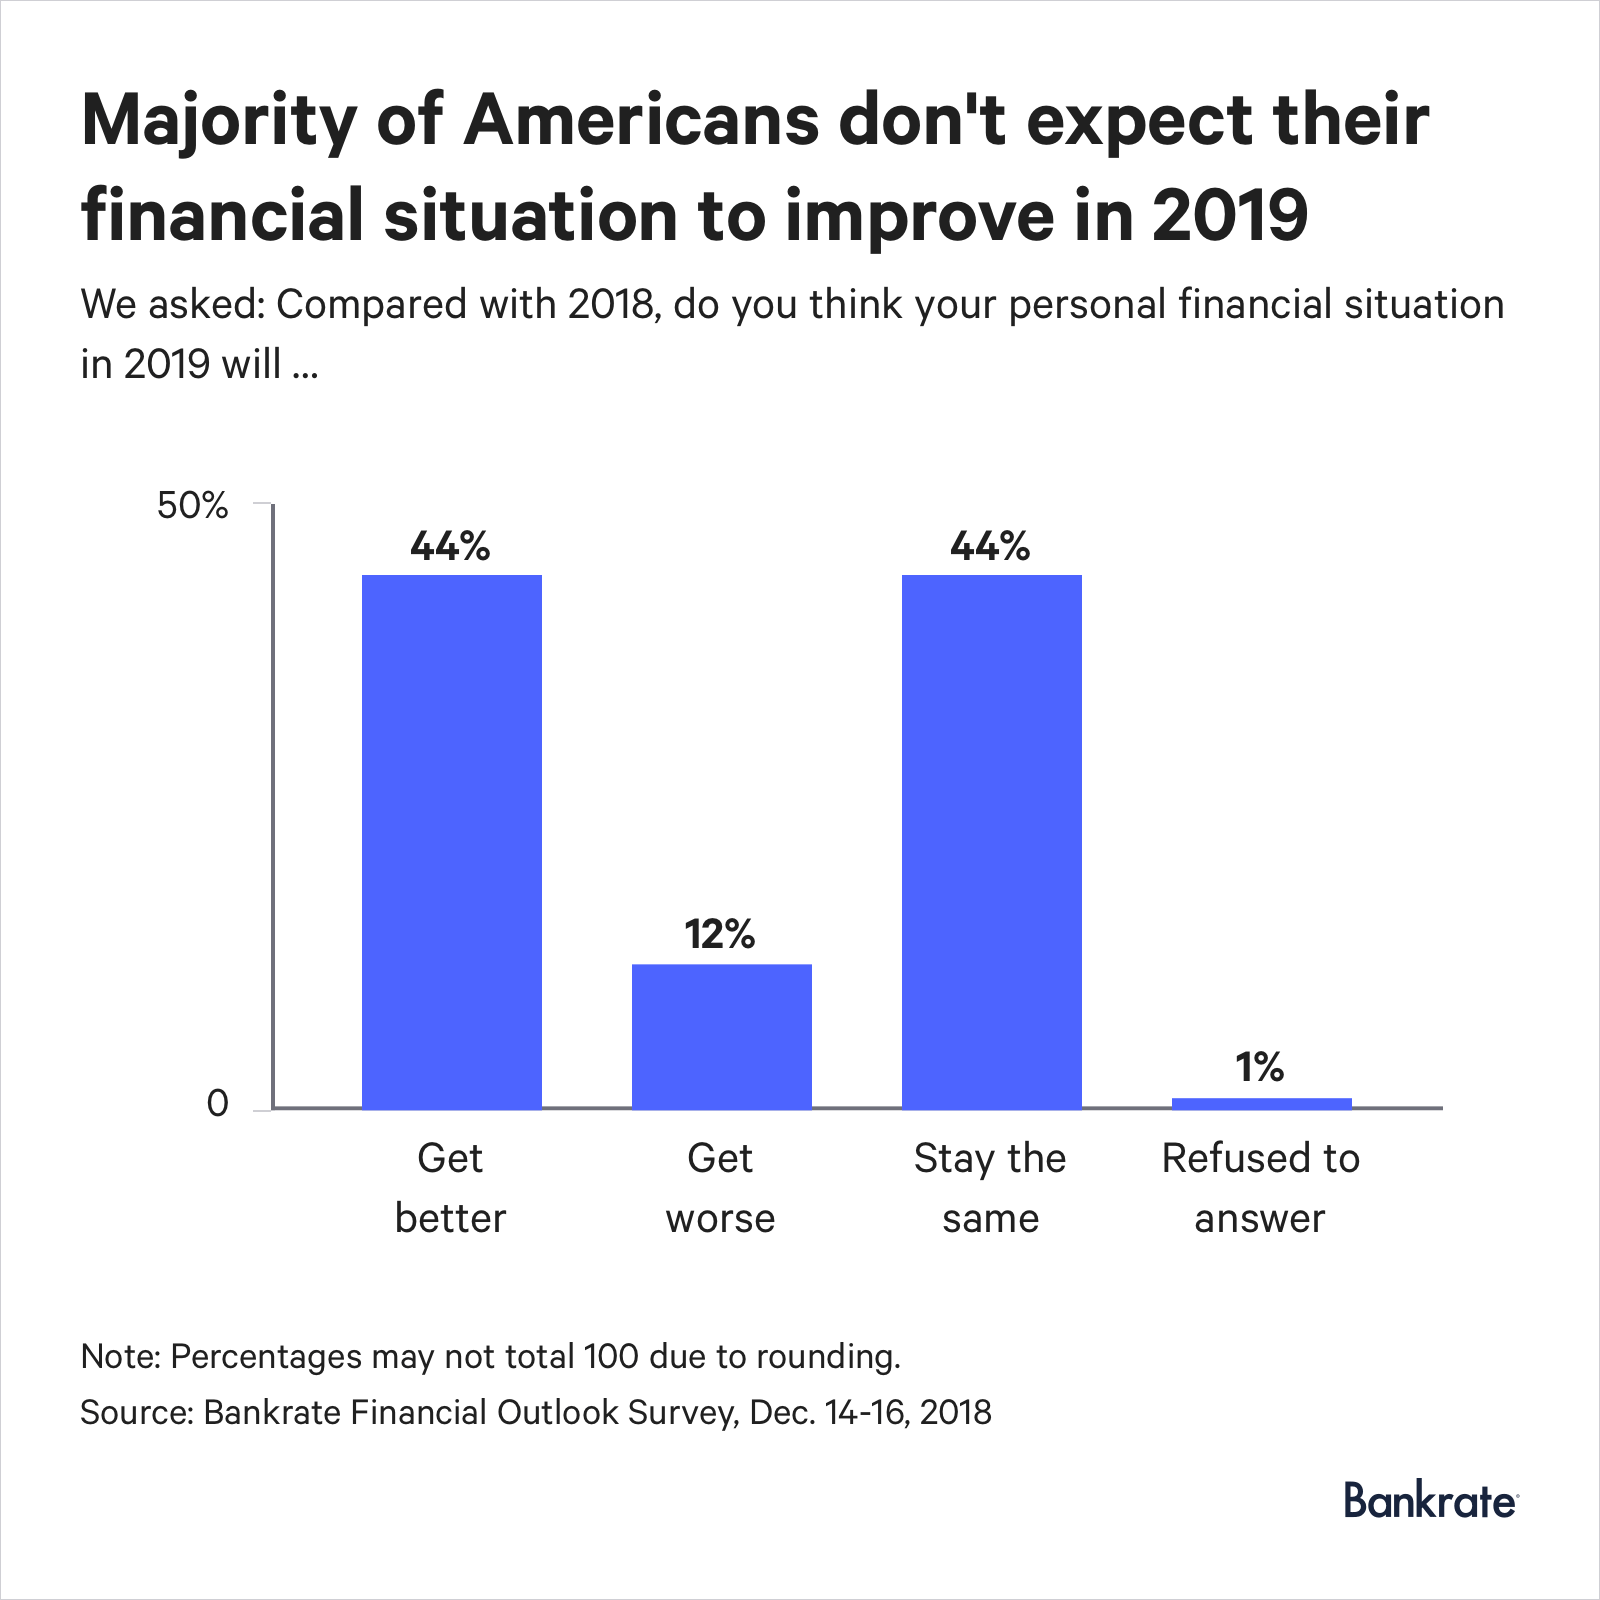 Graph: 44% of Americans expect their finances to get better